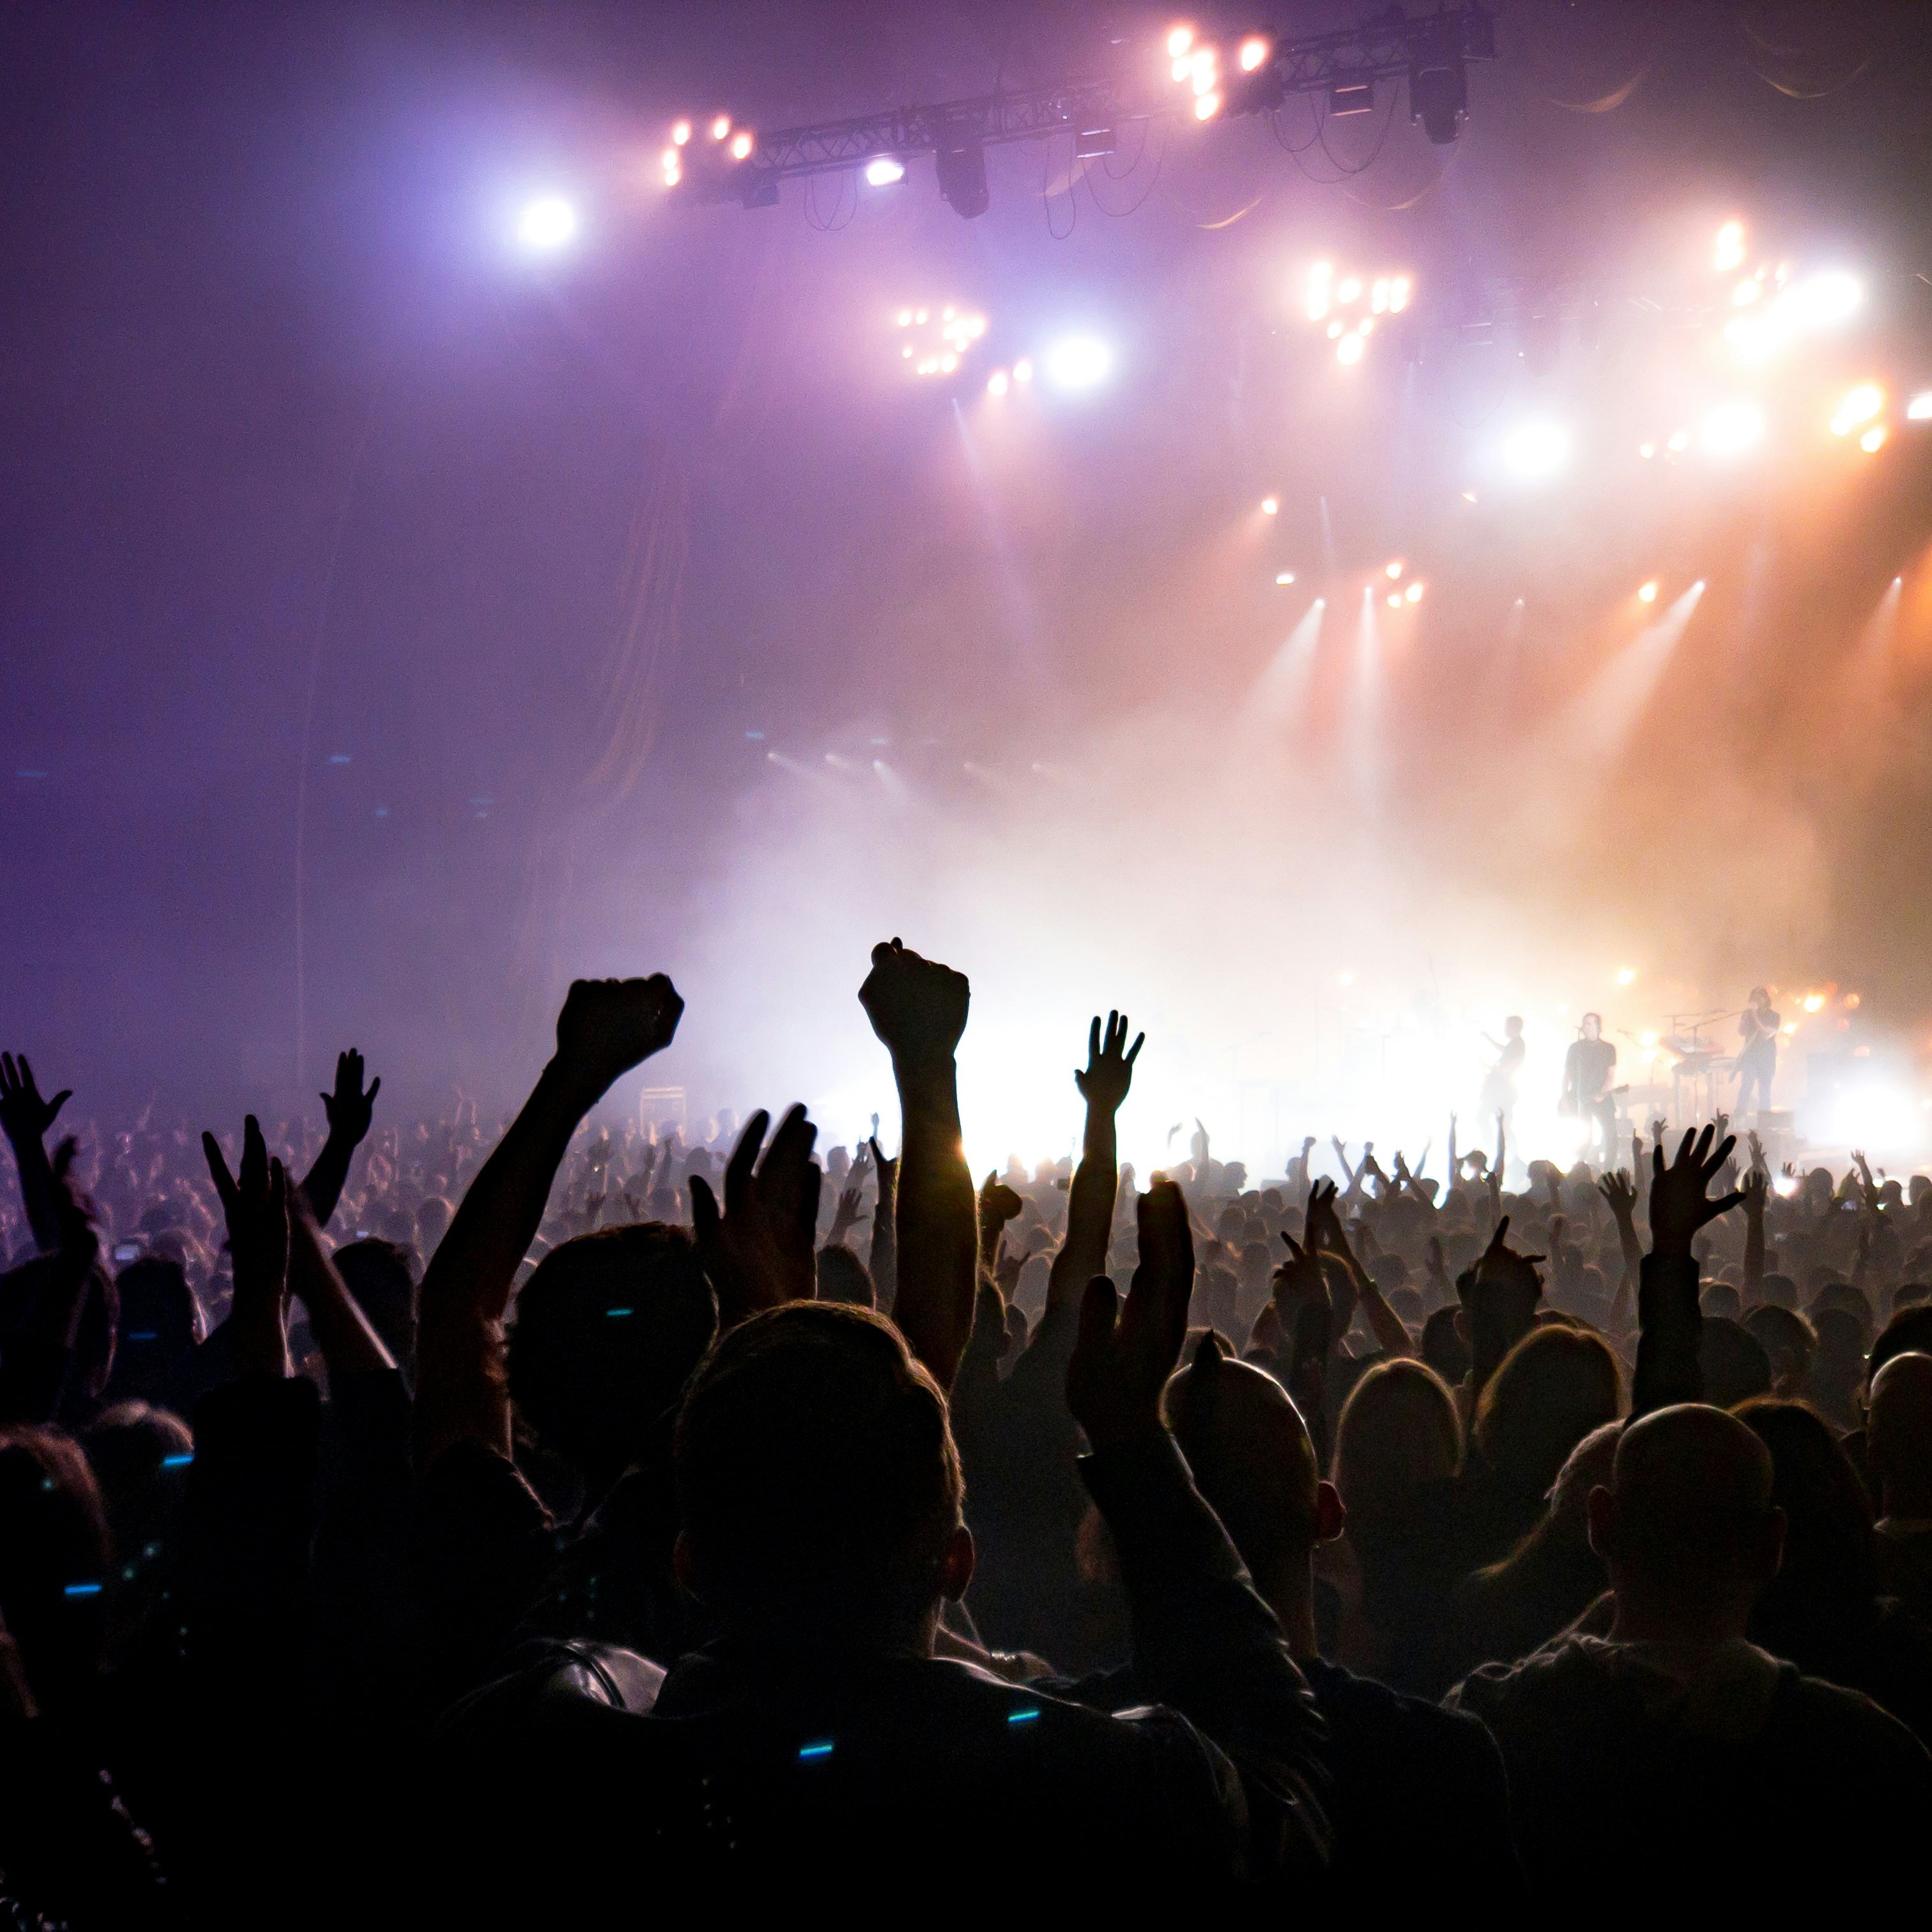 people waving arms in air enthusiastically at concert with lights flashing from the stage